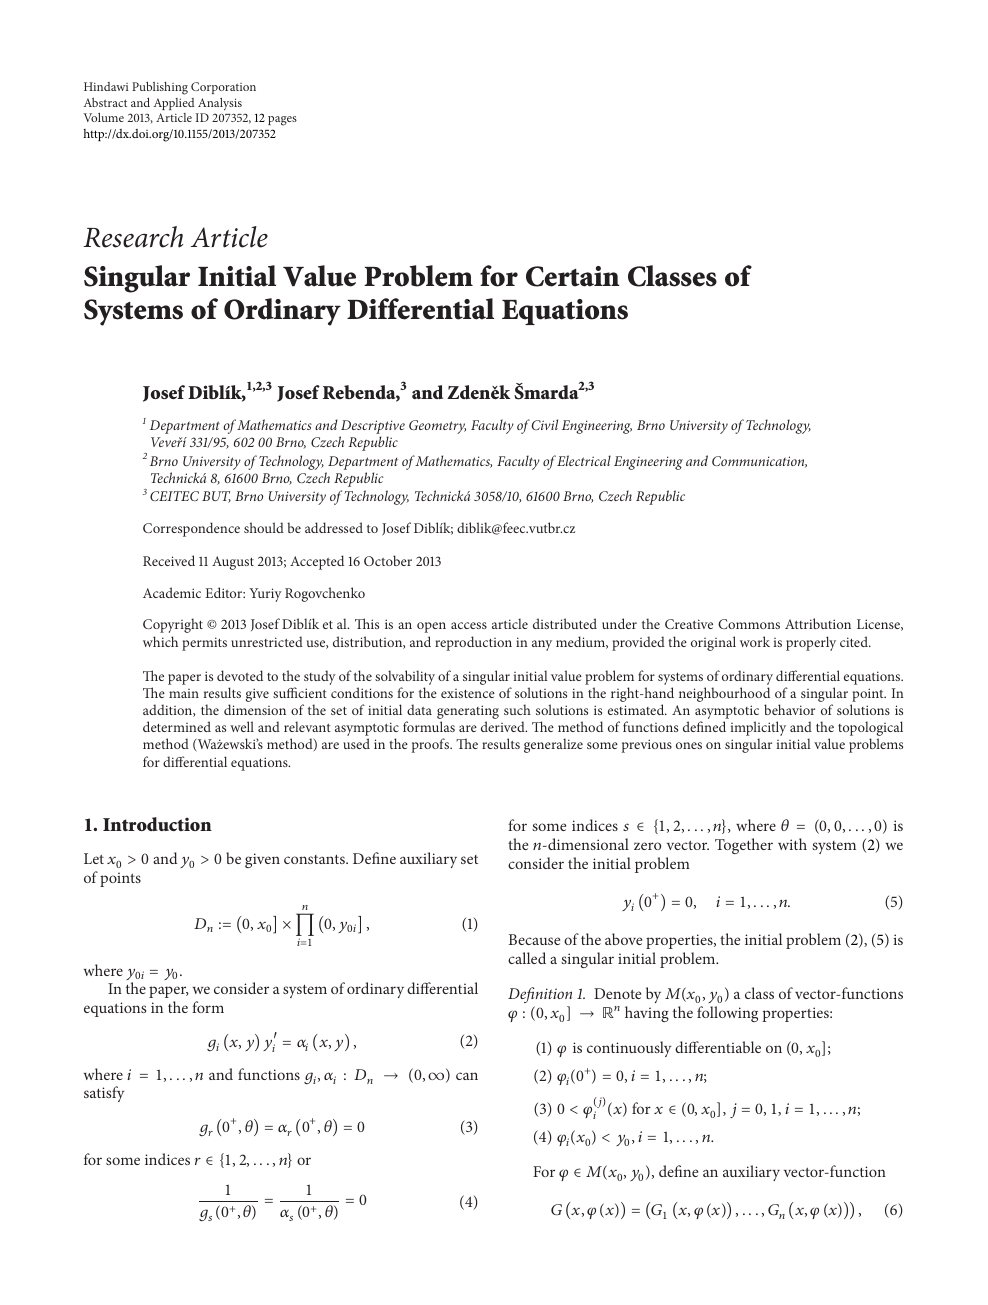 Singular Initial Value Problem For Certain Classes Of Systems Of Ordinary Differential Equations Topic Of Research Paper In Mathematics Download Scholarly Article Pdf And Read For Free On Cyberleninka Open Science